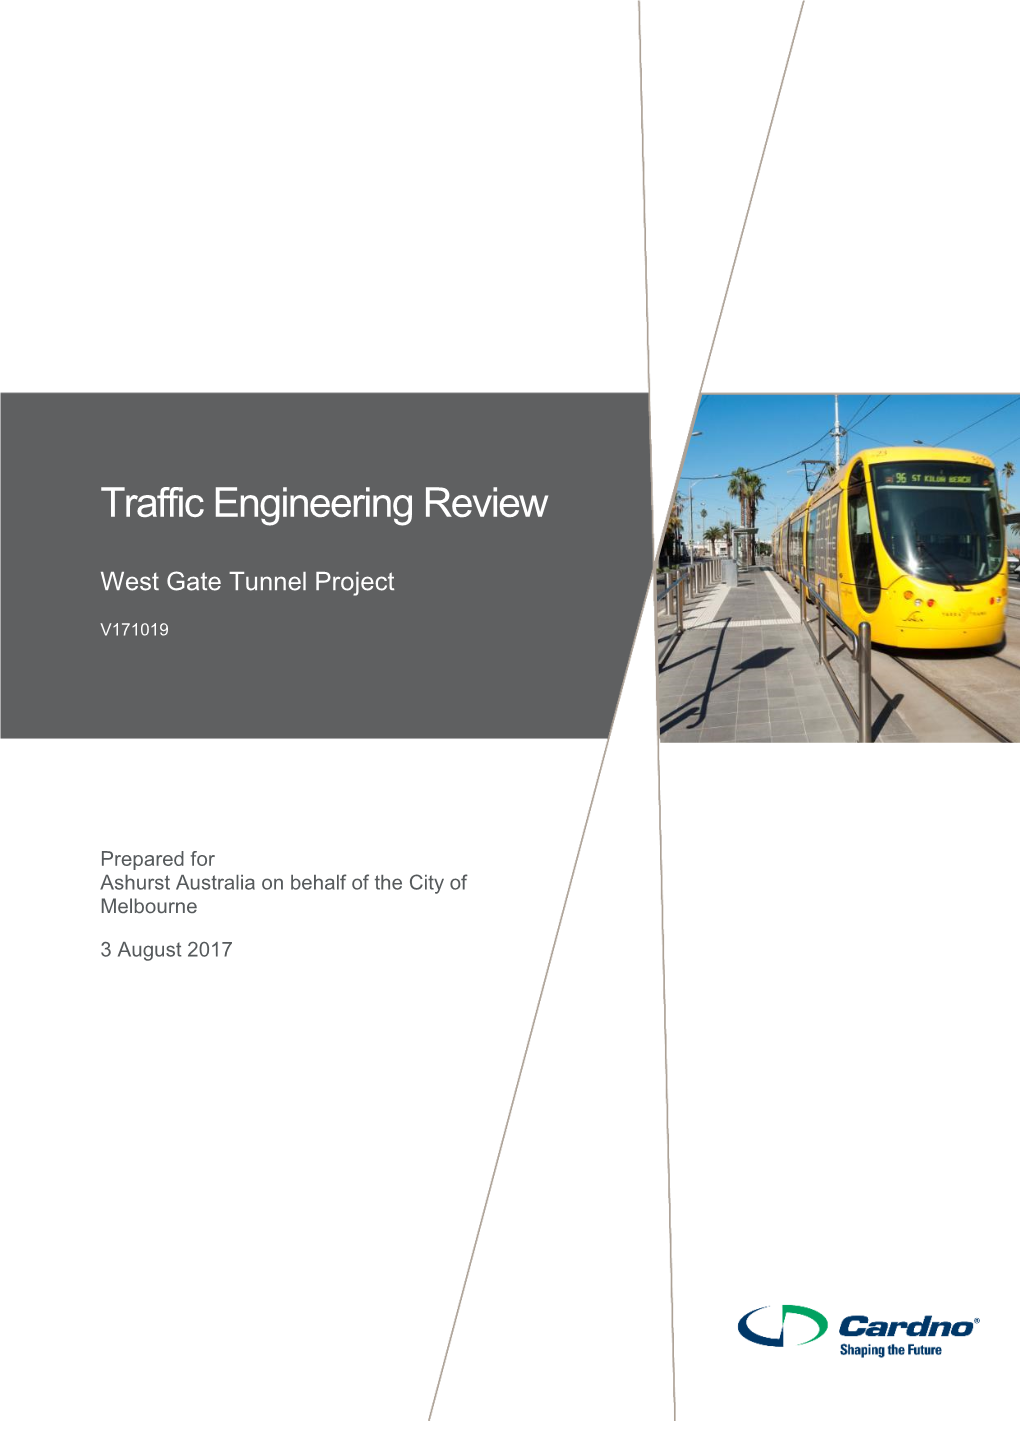 Traffic Engineering Review Traffic Engineering Review